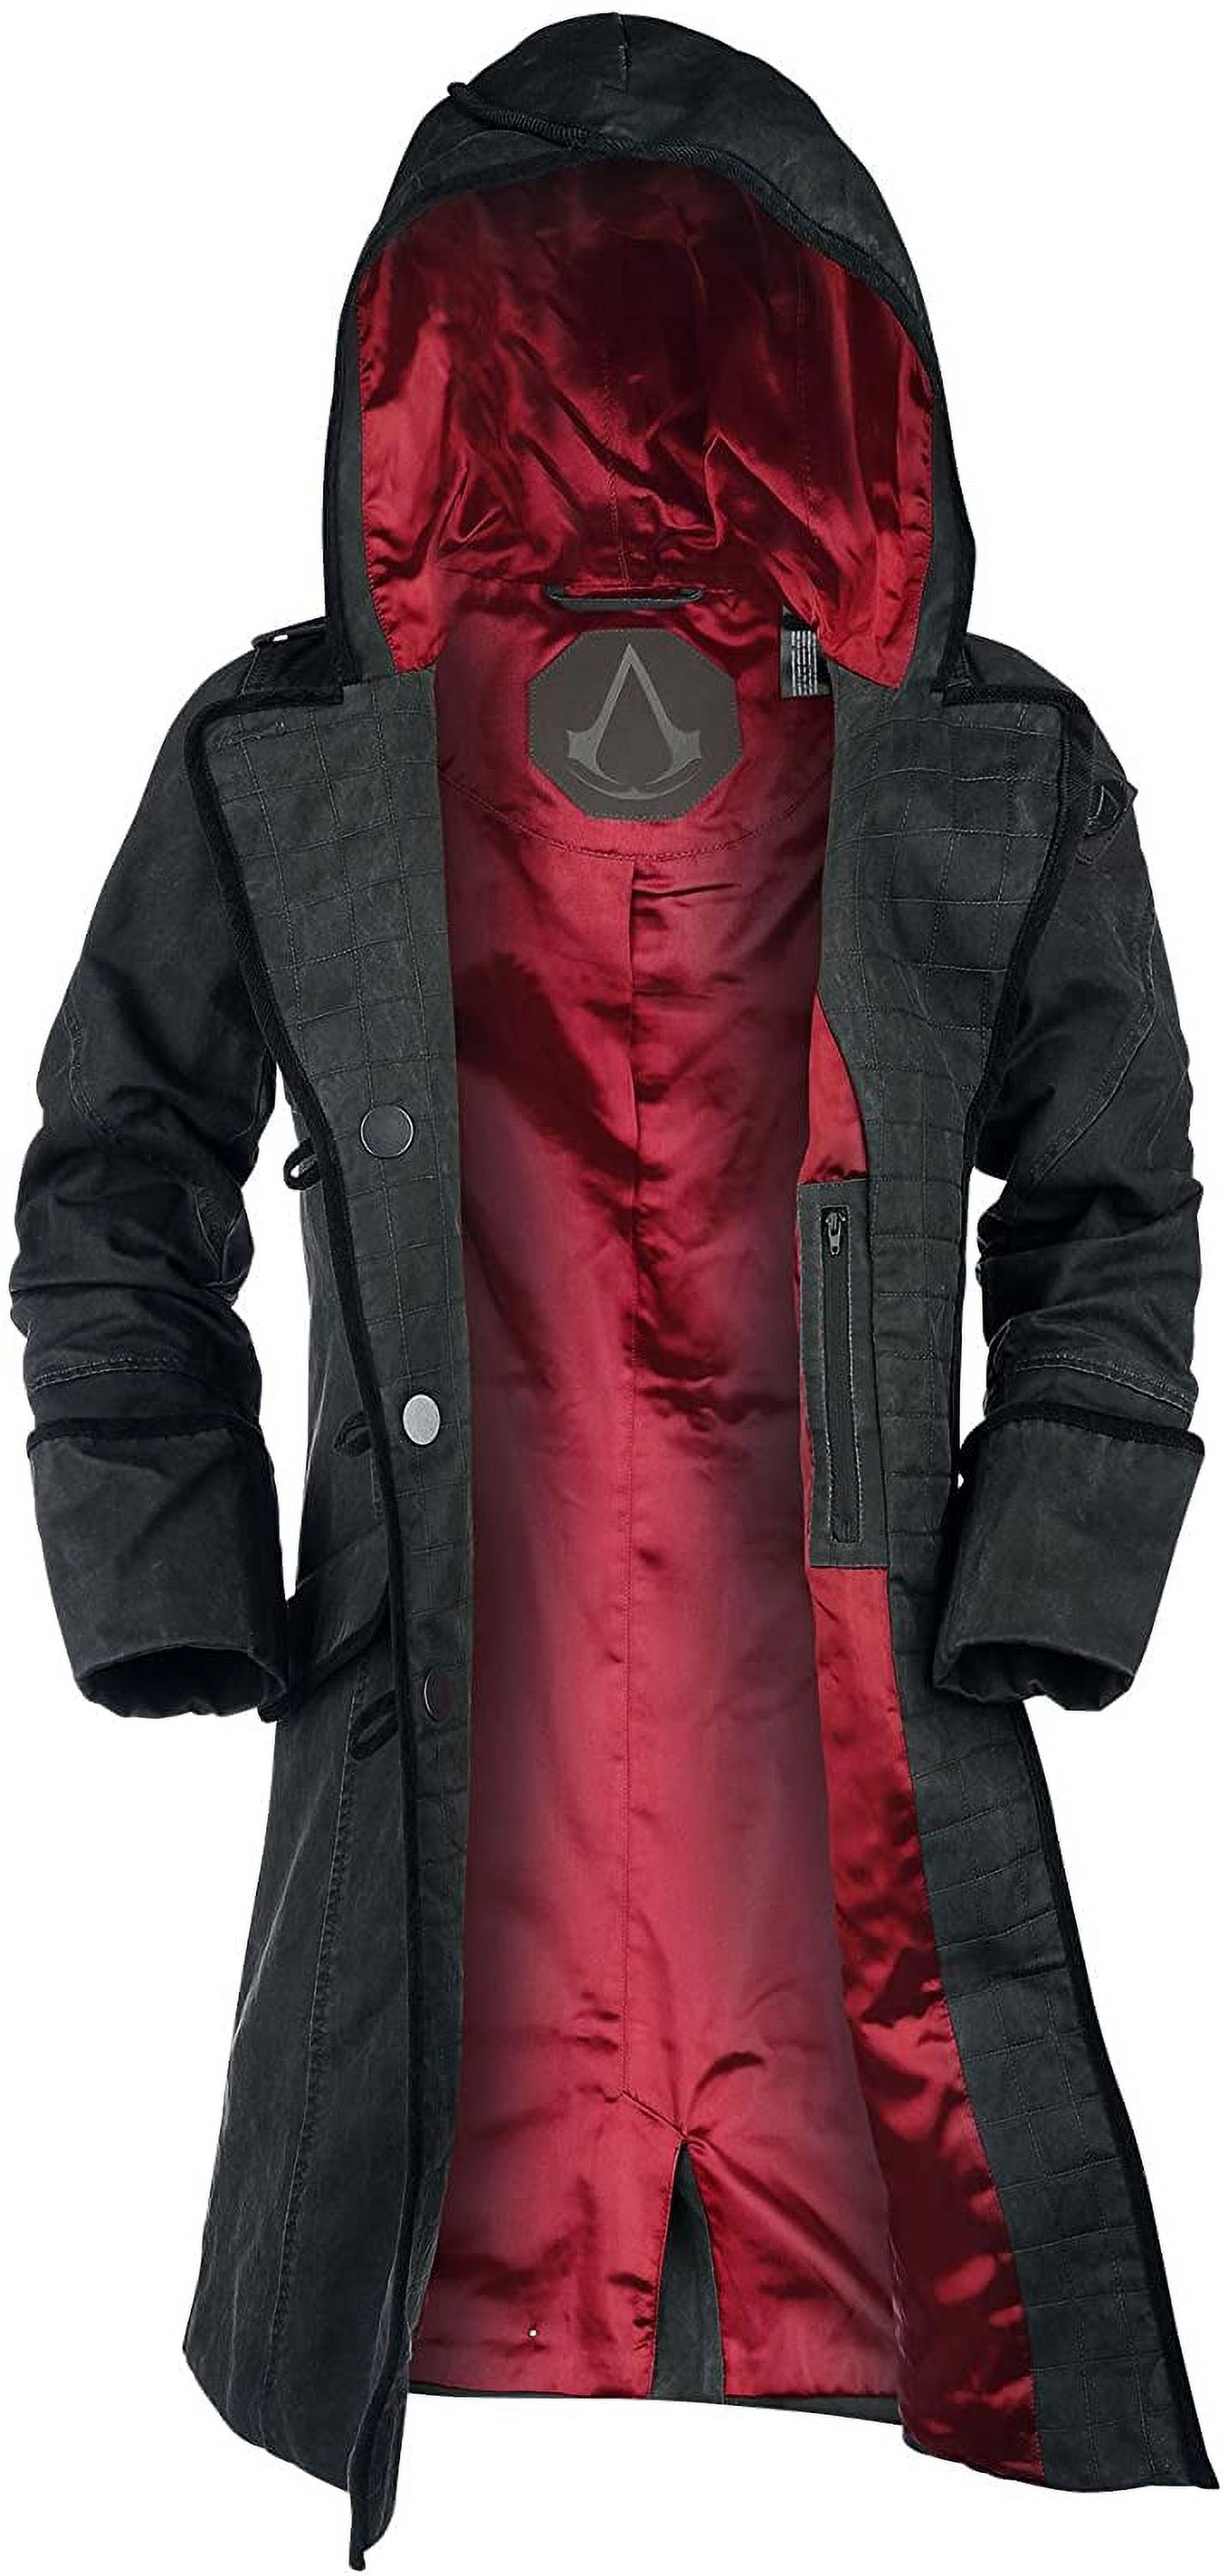 Musterbrand GRAY Assassin's Creed Syndicate Evie Hooded Coat, US Small - image 3 of 5